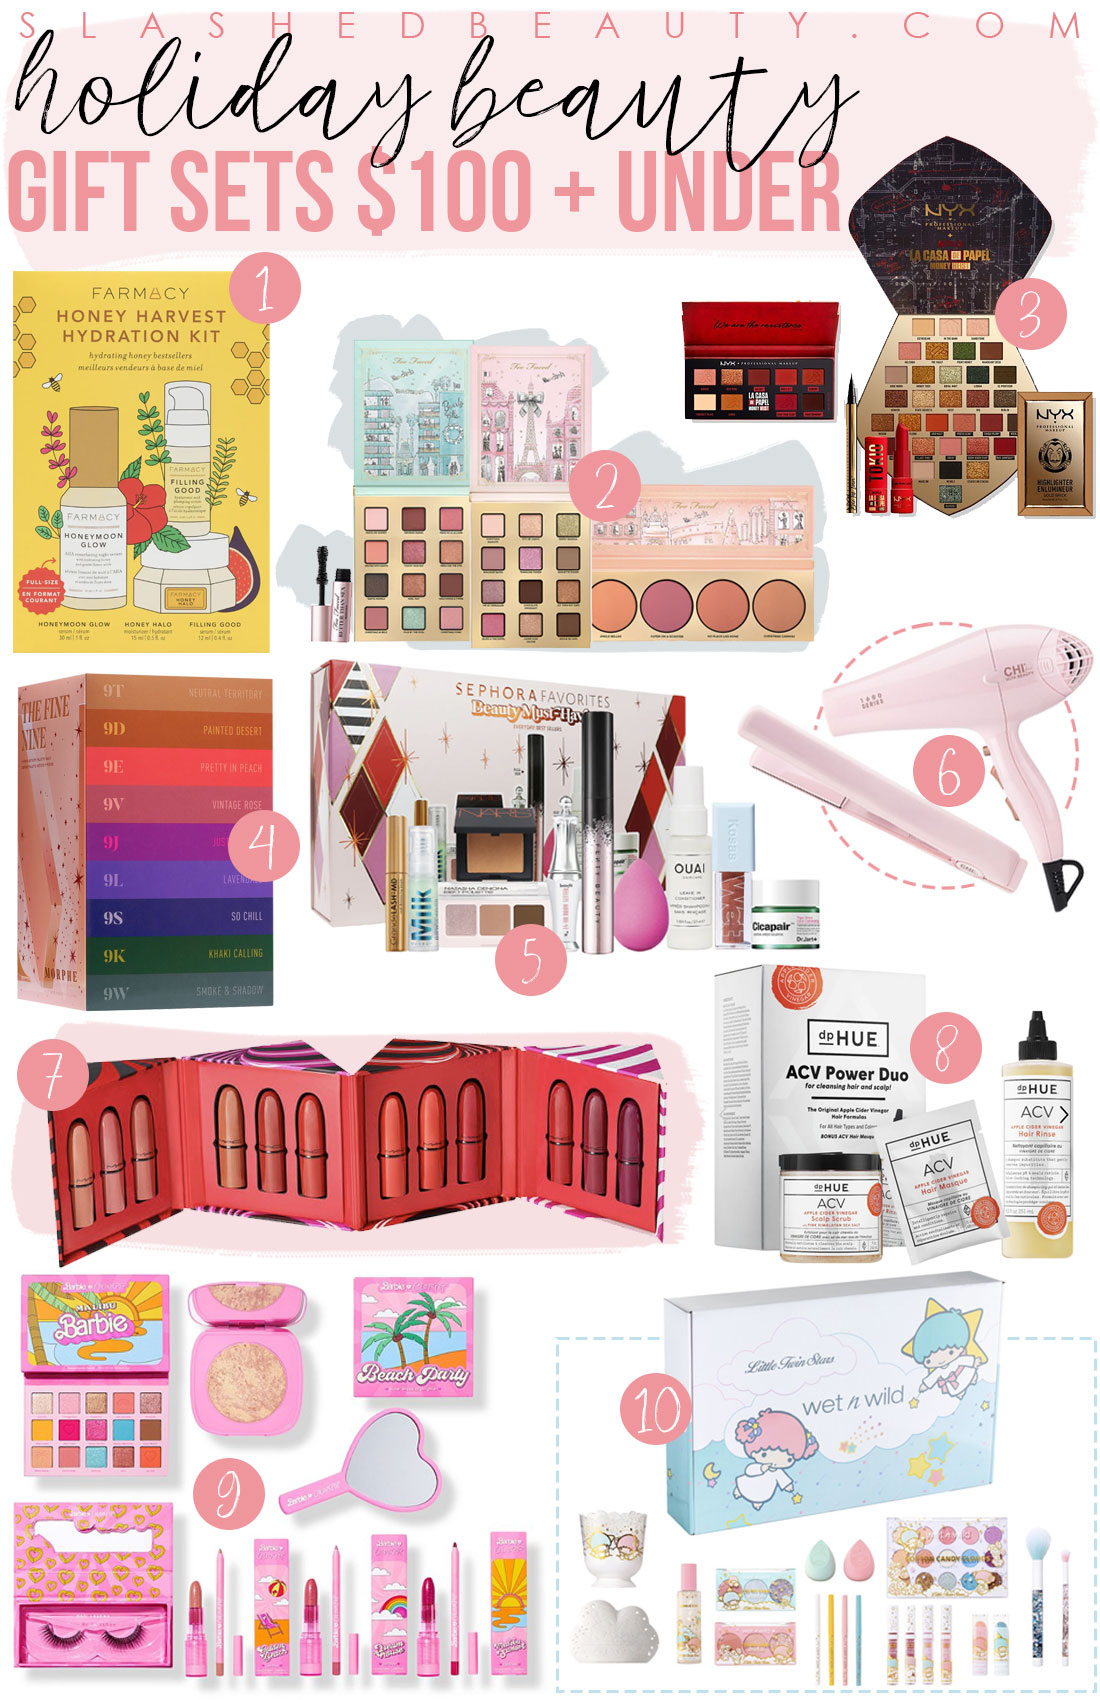 Collage of 2021 Holiday Beauty Value Gift Sets $100 & Under | Affordable Beauty Gift Guide | Beauty Holiday Gifts | Slashed Beauty